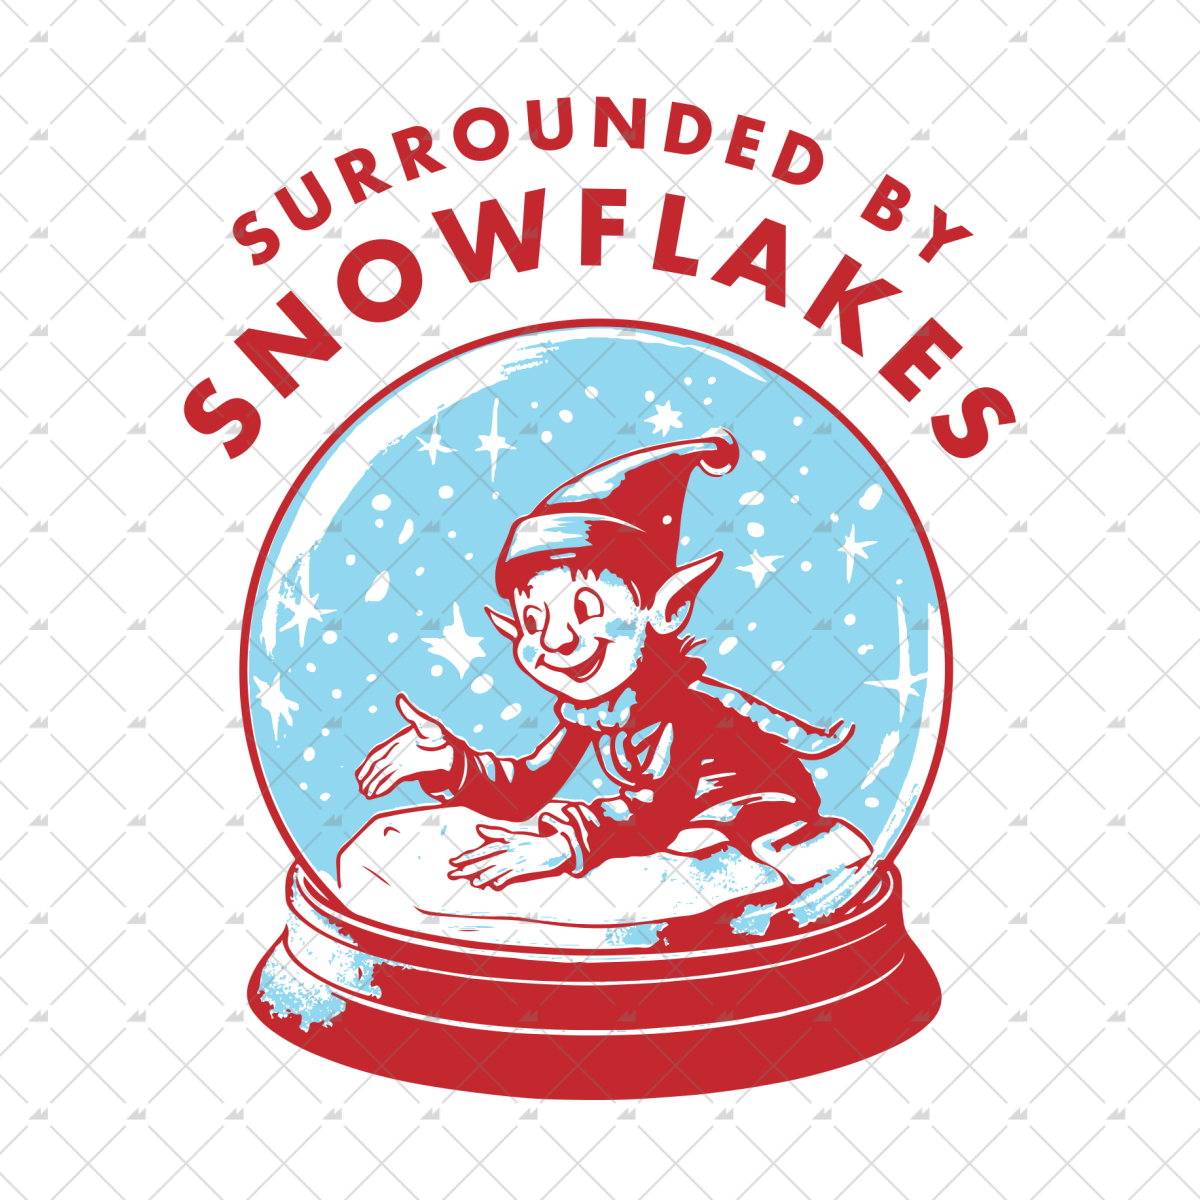 Surrounded By Snowflakes - Sticker